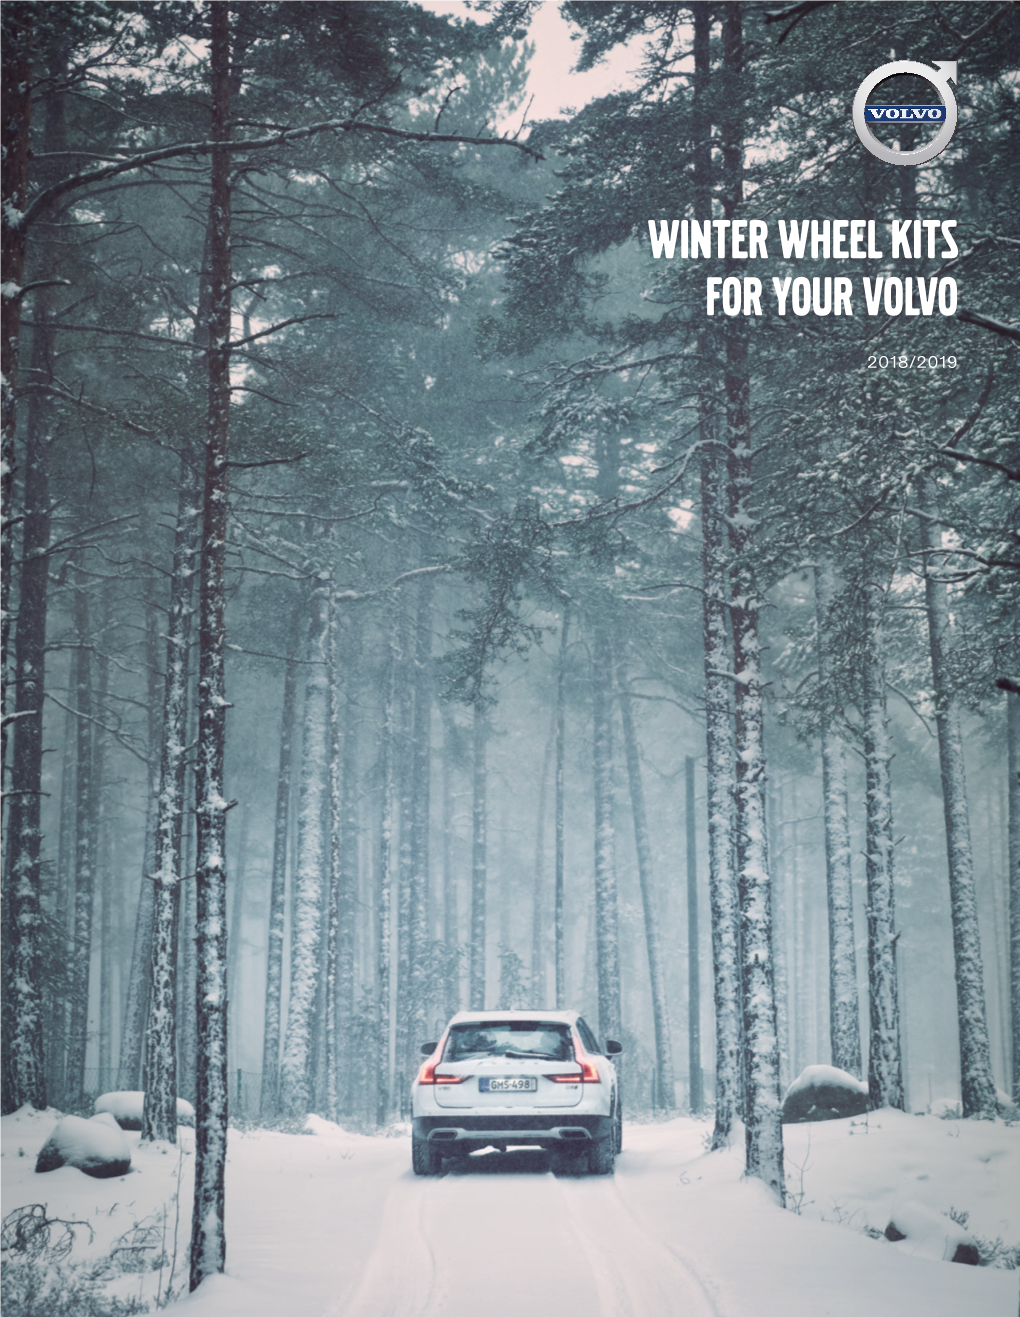 Winter Wheel Kits for Your Volvo